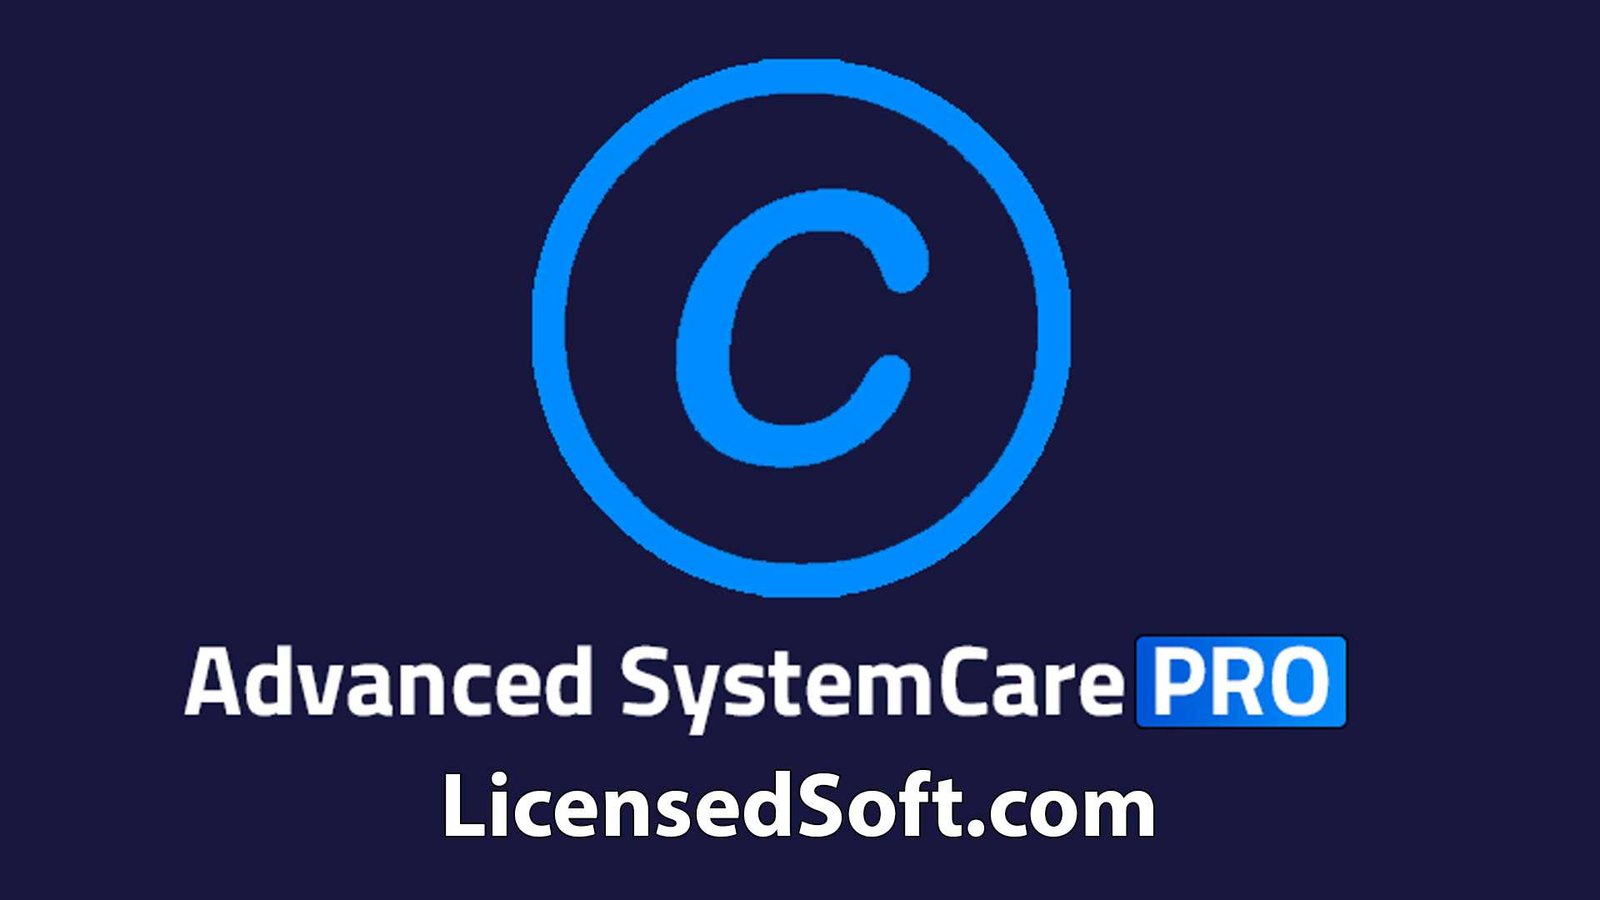 IObit Advanced SystemCare Pro 16.6.0.259 Cover Image By LicensedSoft